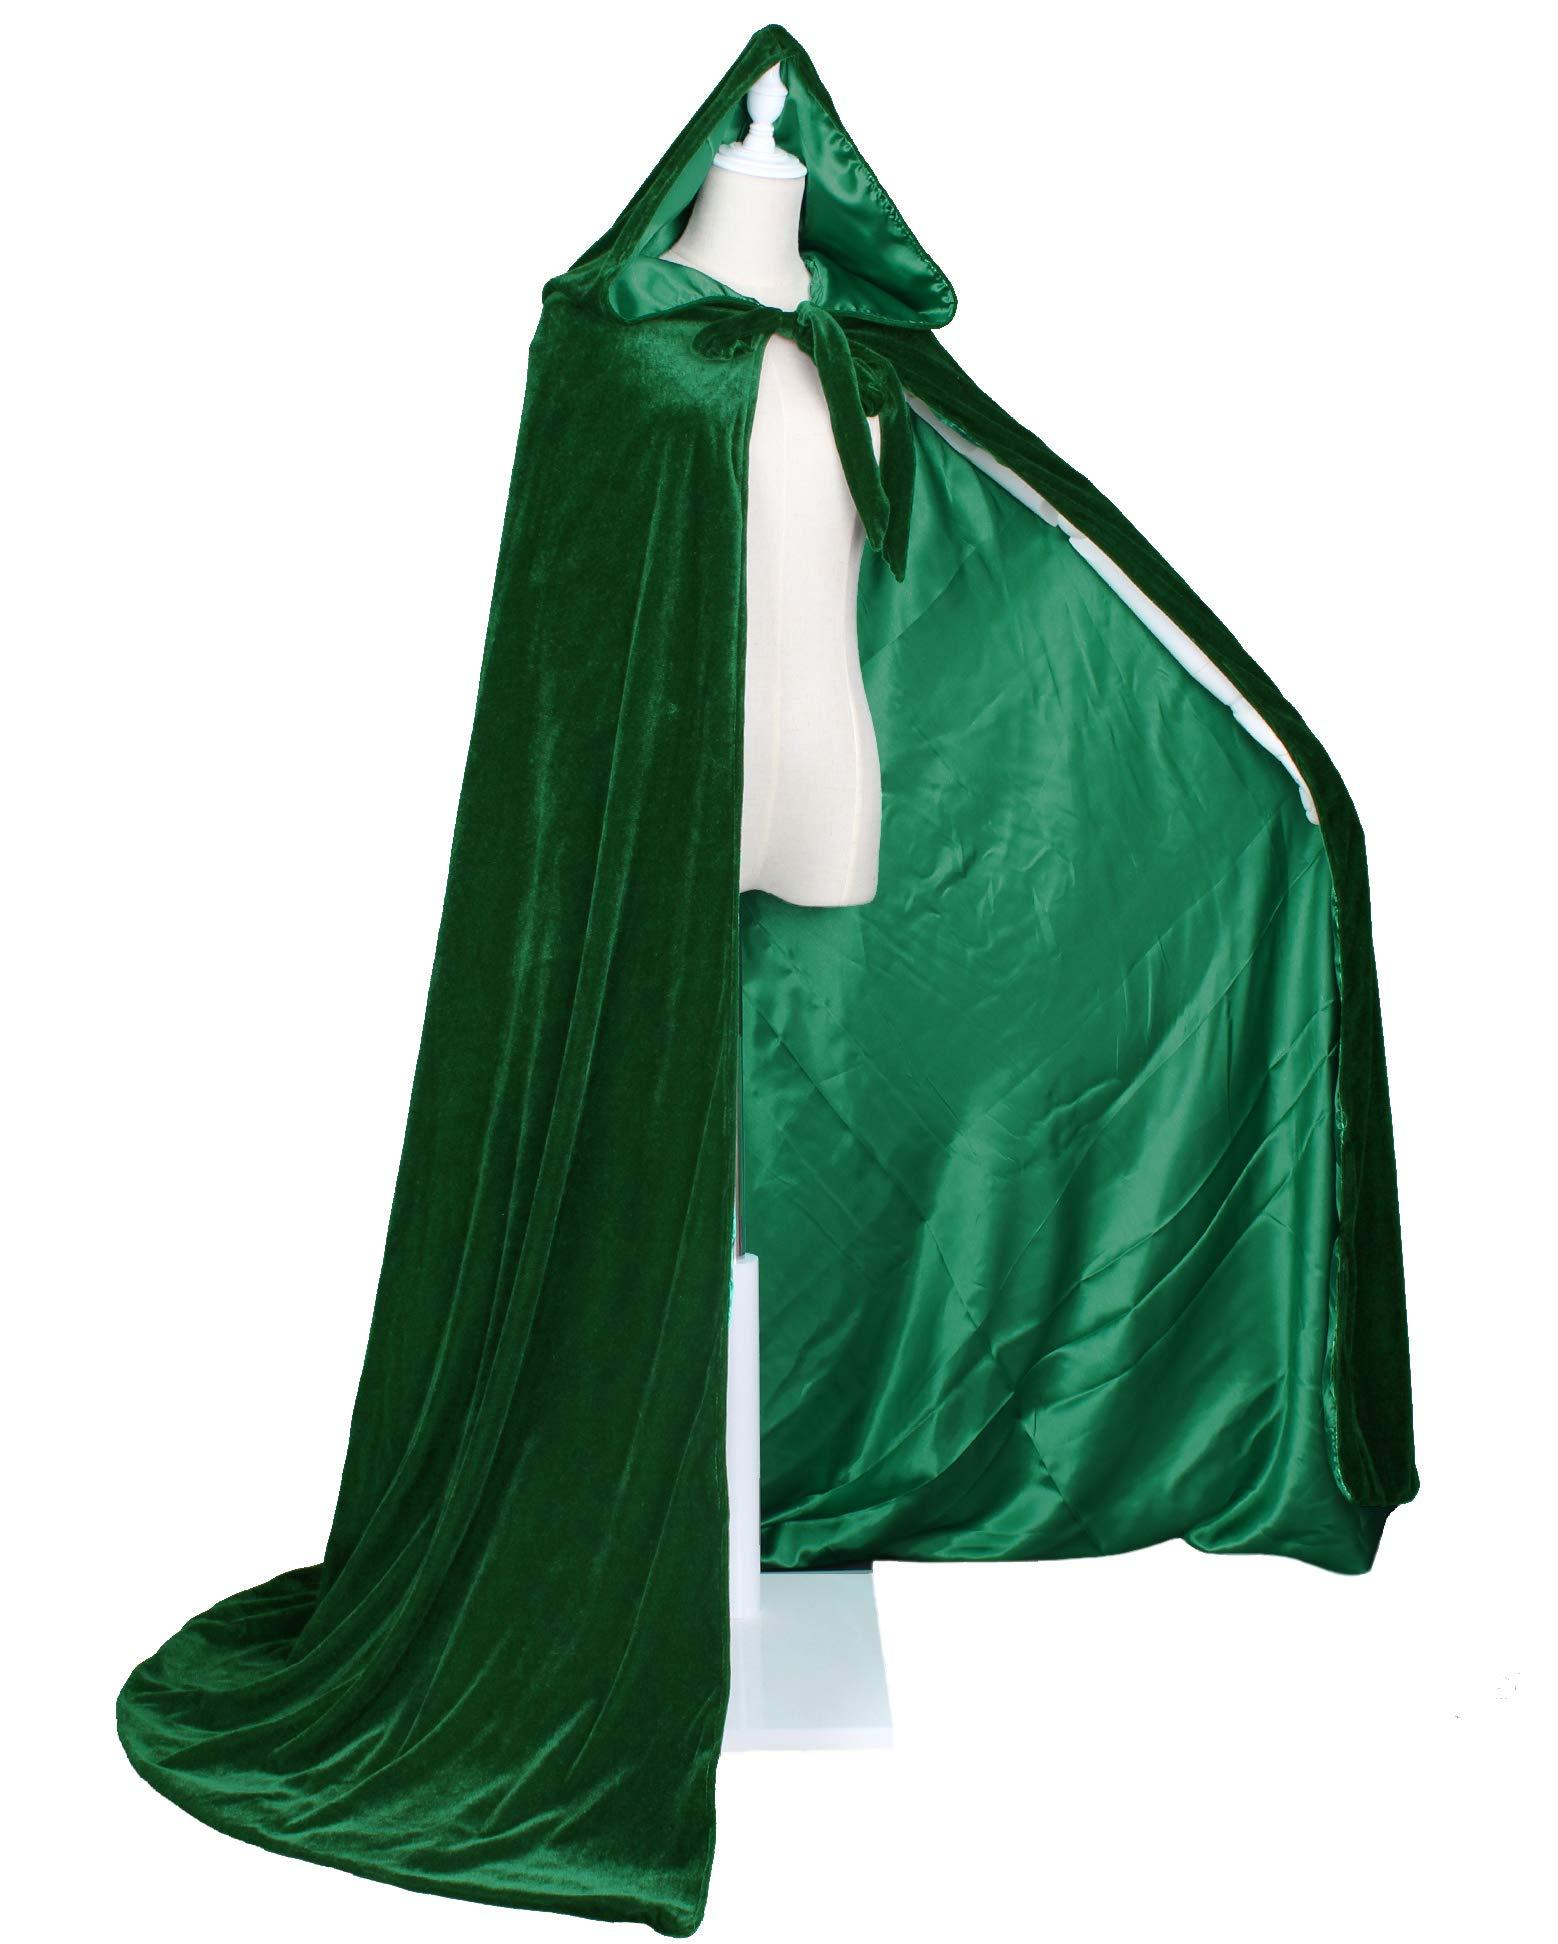 LuckyMjmy Velvet Medieval Wedding Cape Cloak Lined with Satin lining (Large, Dark green) 1